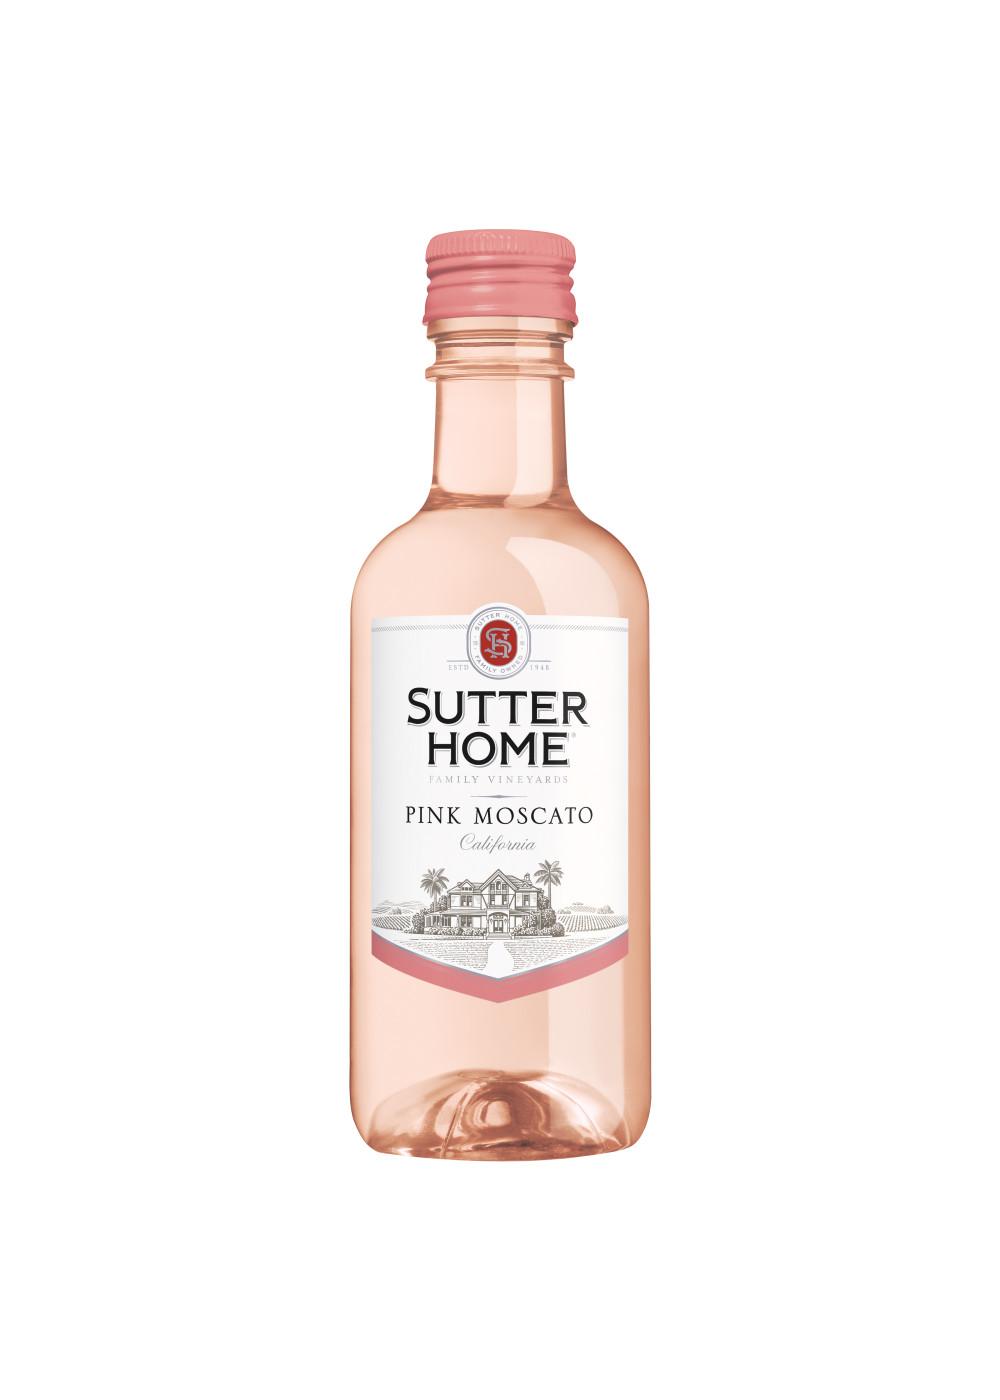 Sutter Home Family Vineyards Pink Moscato 187 mL Bottles; image 6 of 7